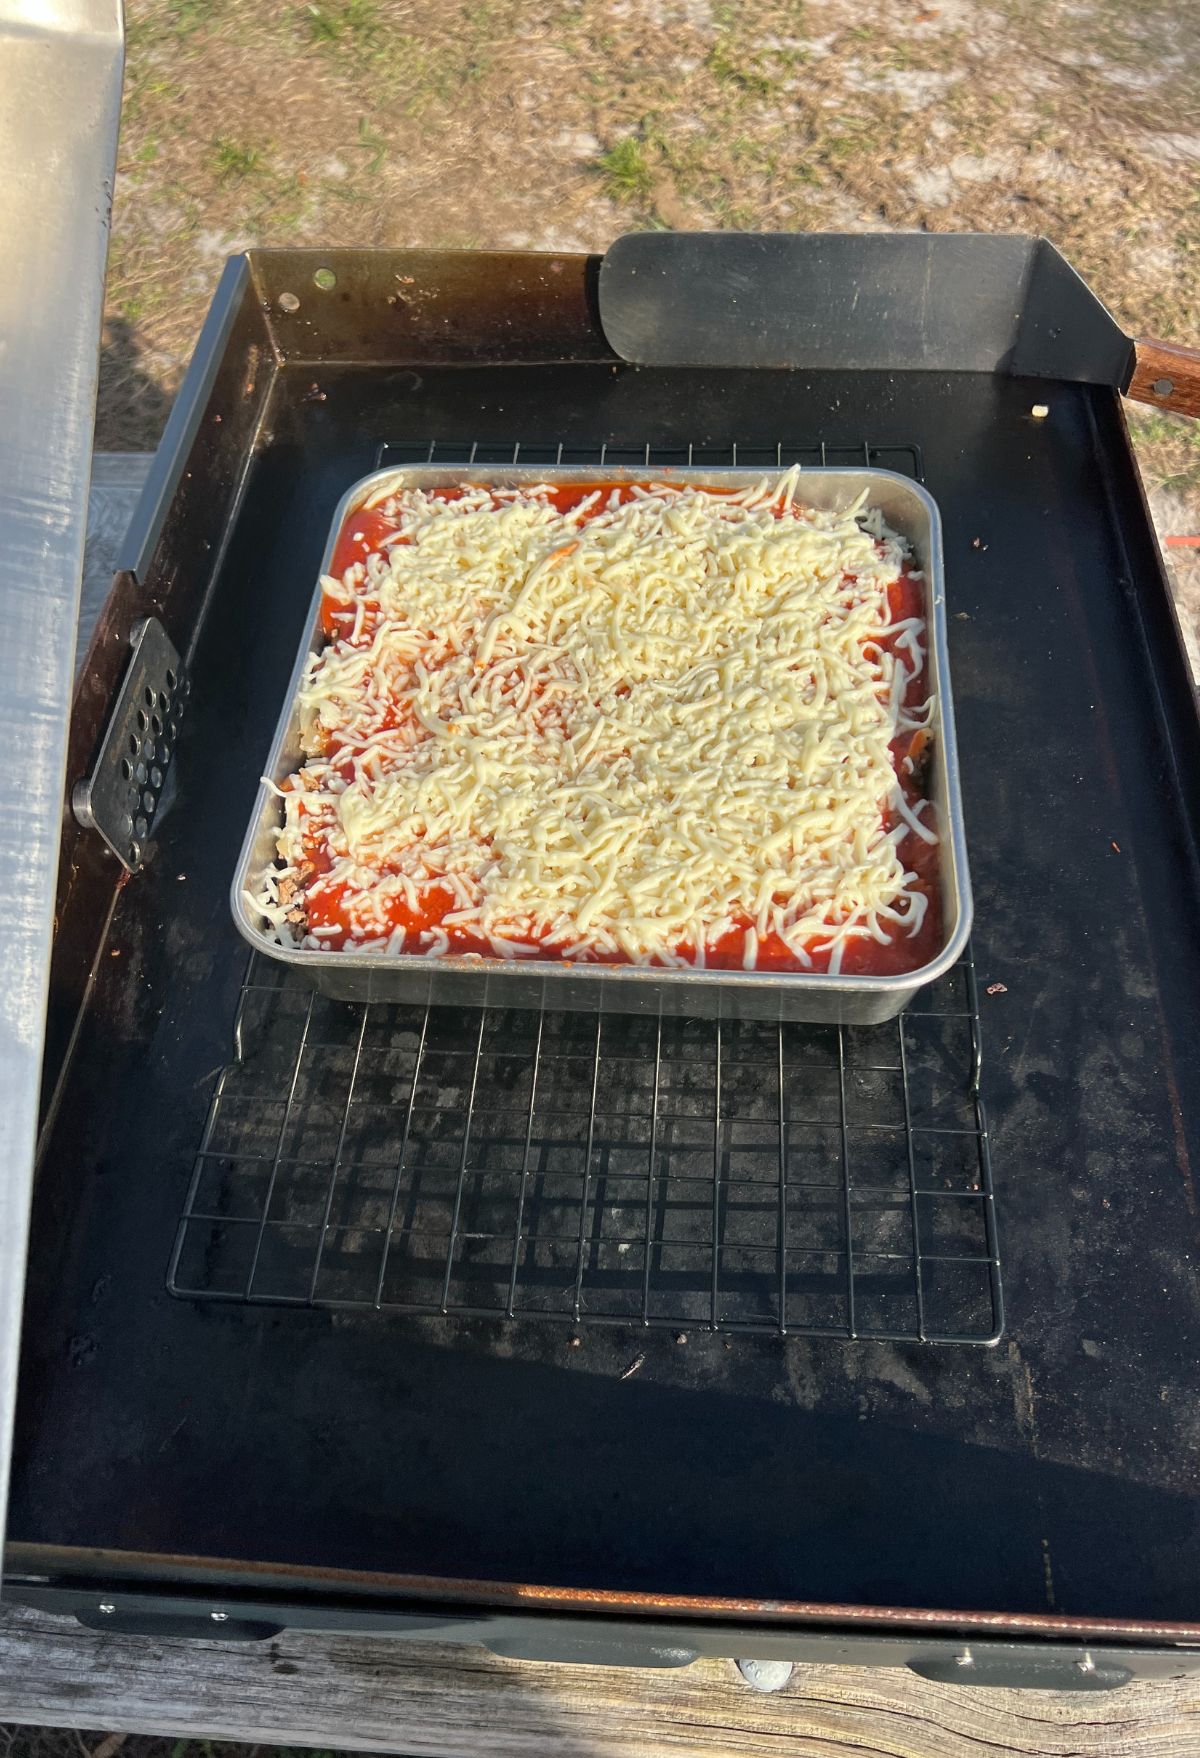 A pizza is being cooked on a grill.